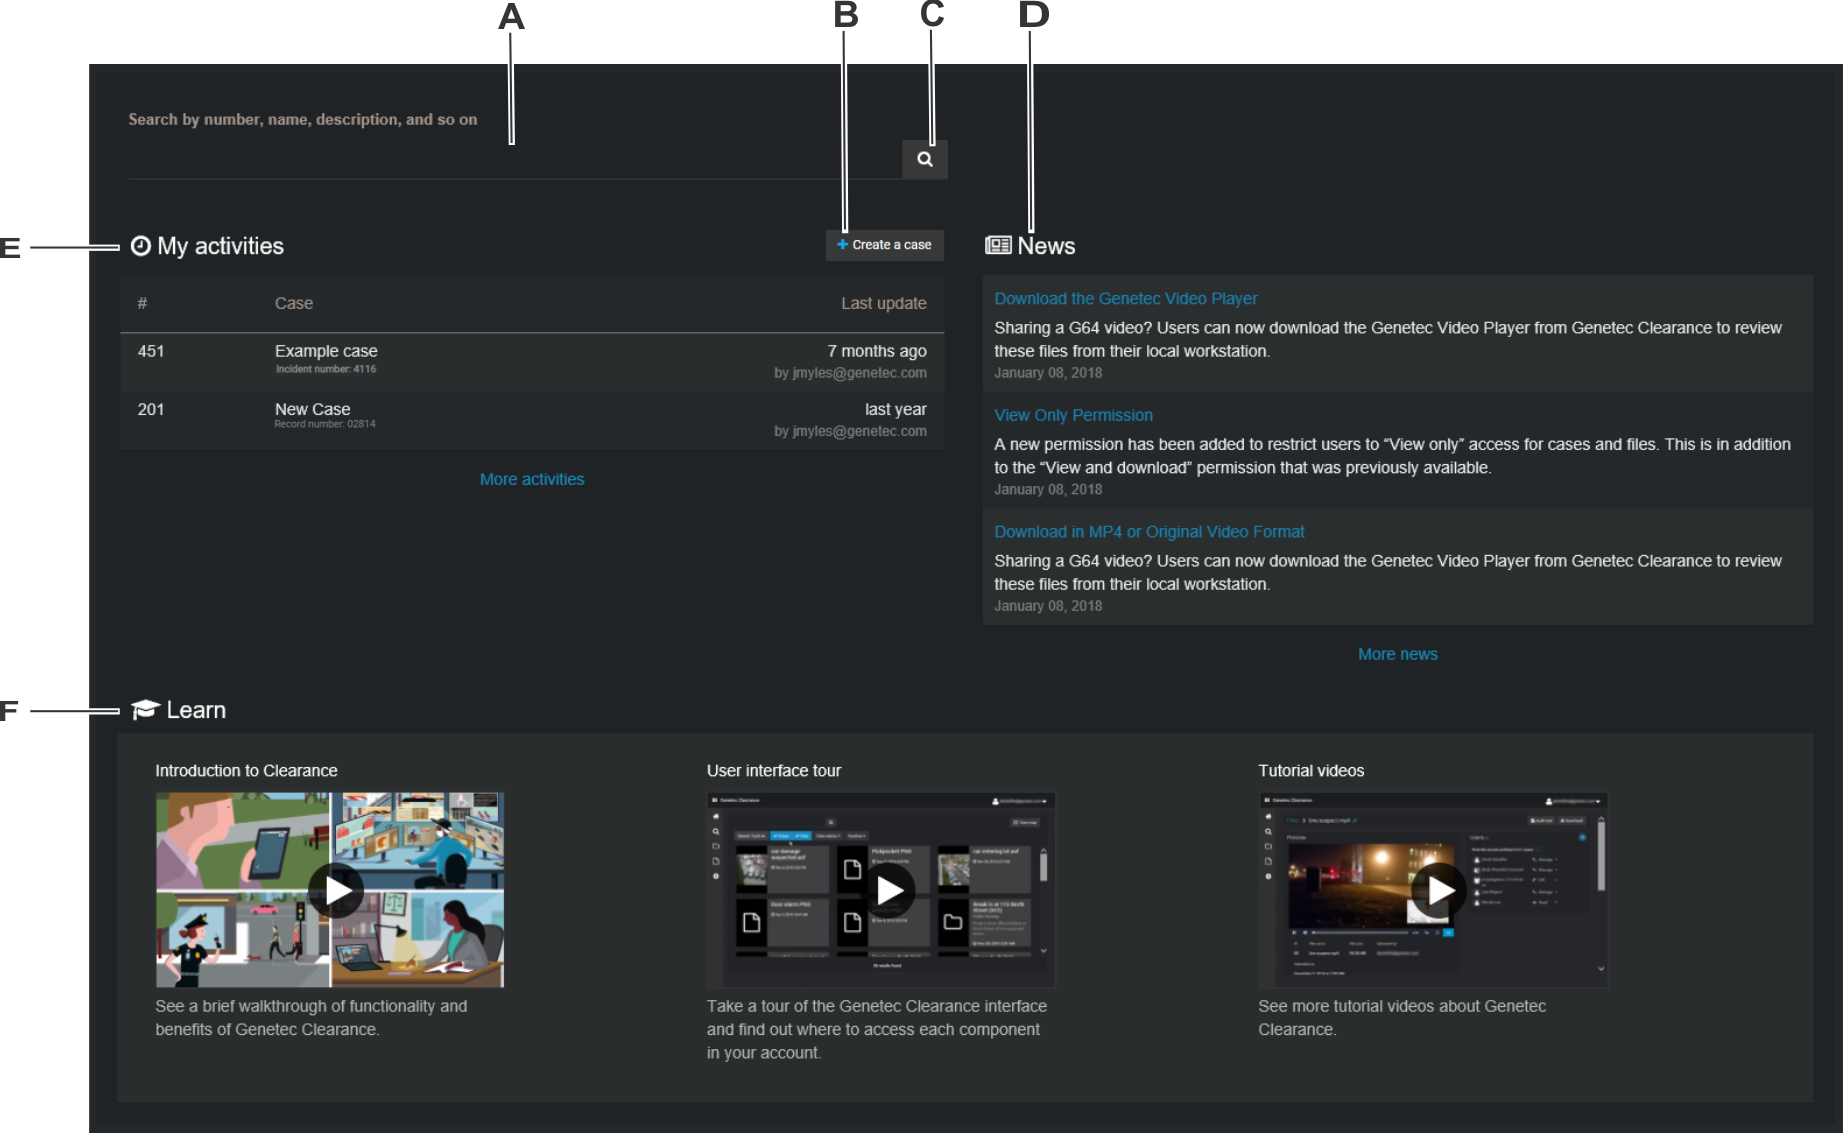 The home page in Clearance, with callouts to the UI elements.